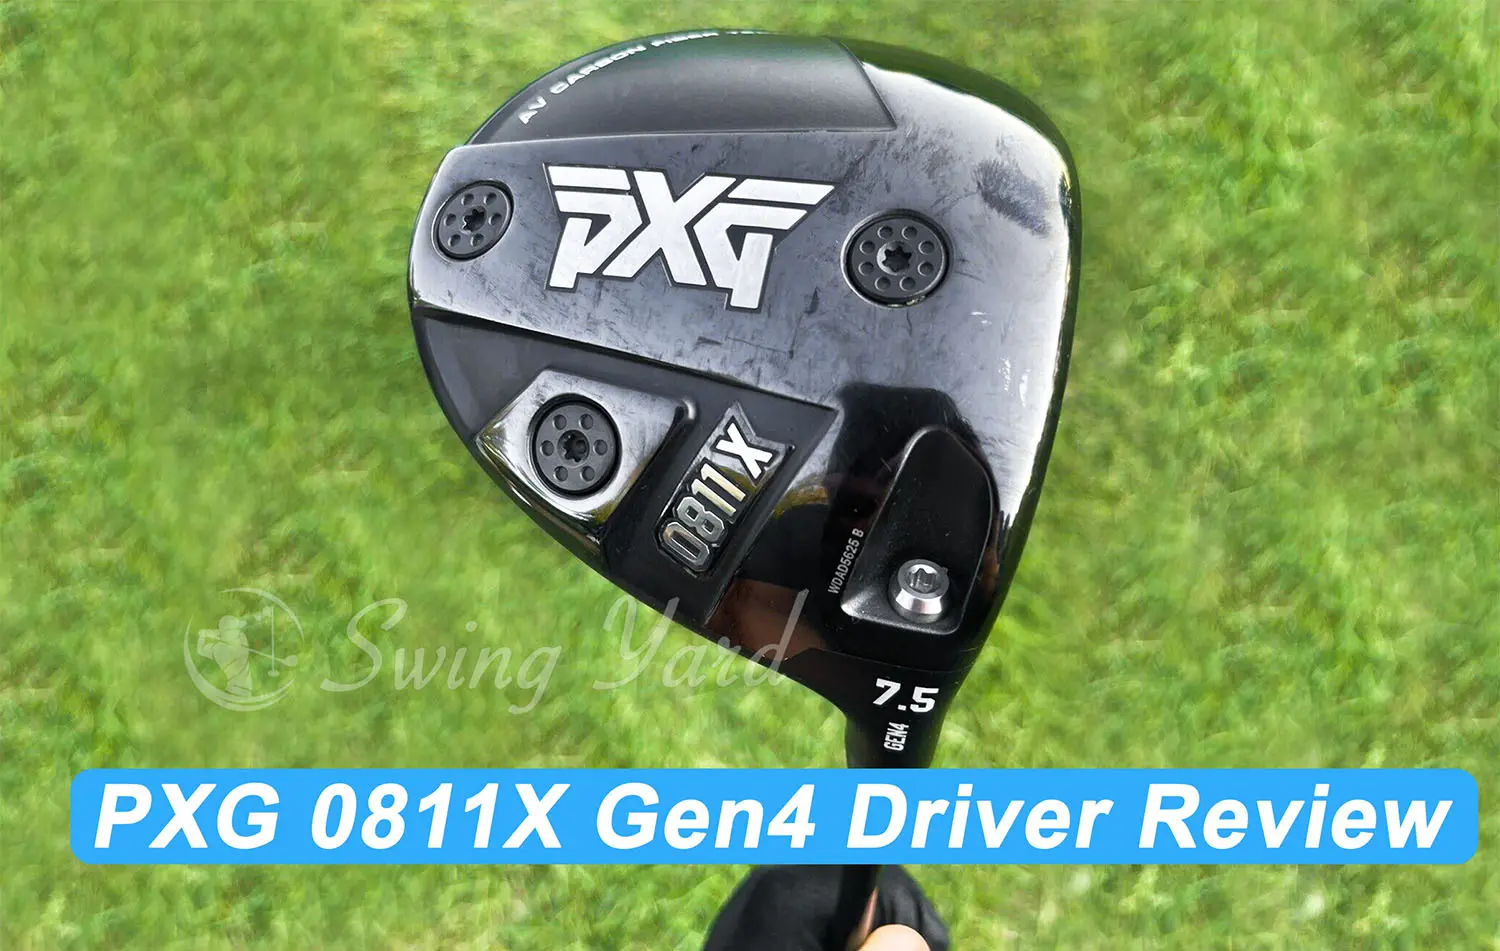 PXG 0811 X Gen4 Driver Review and Test Results